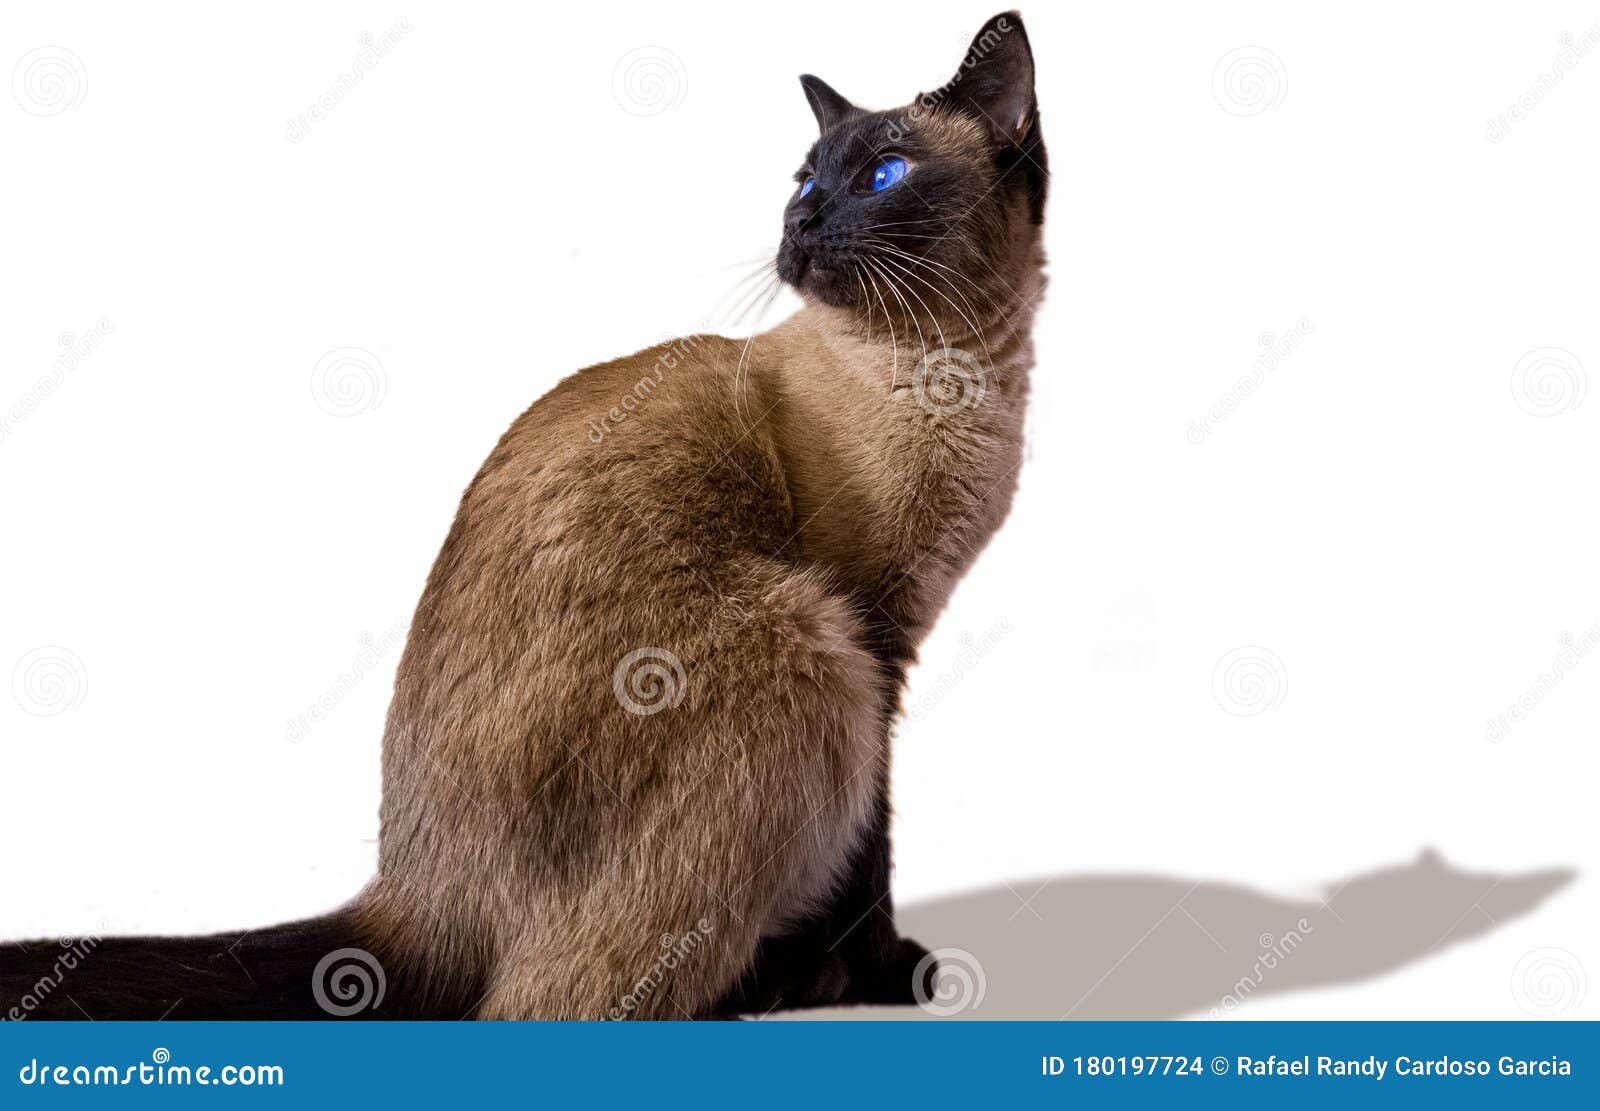 Siamese Cat Looking Behind In A With Background Stock Photo Image of